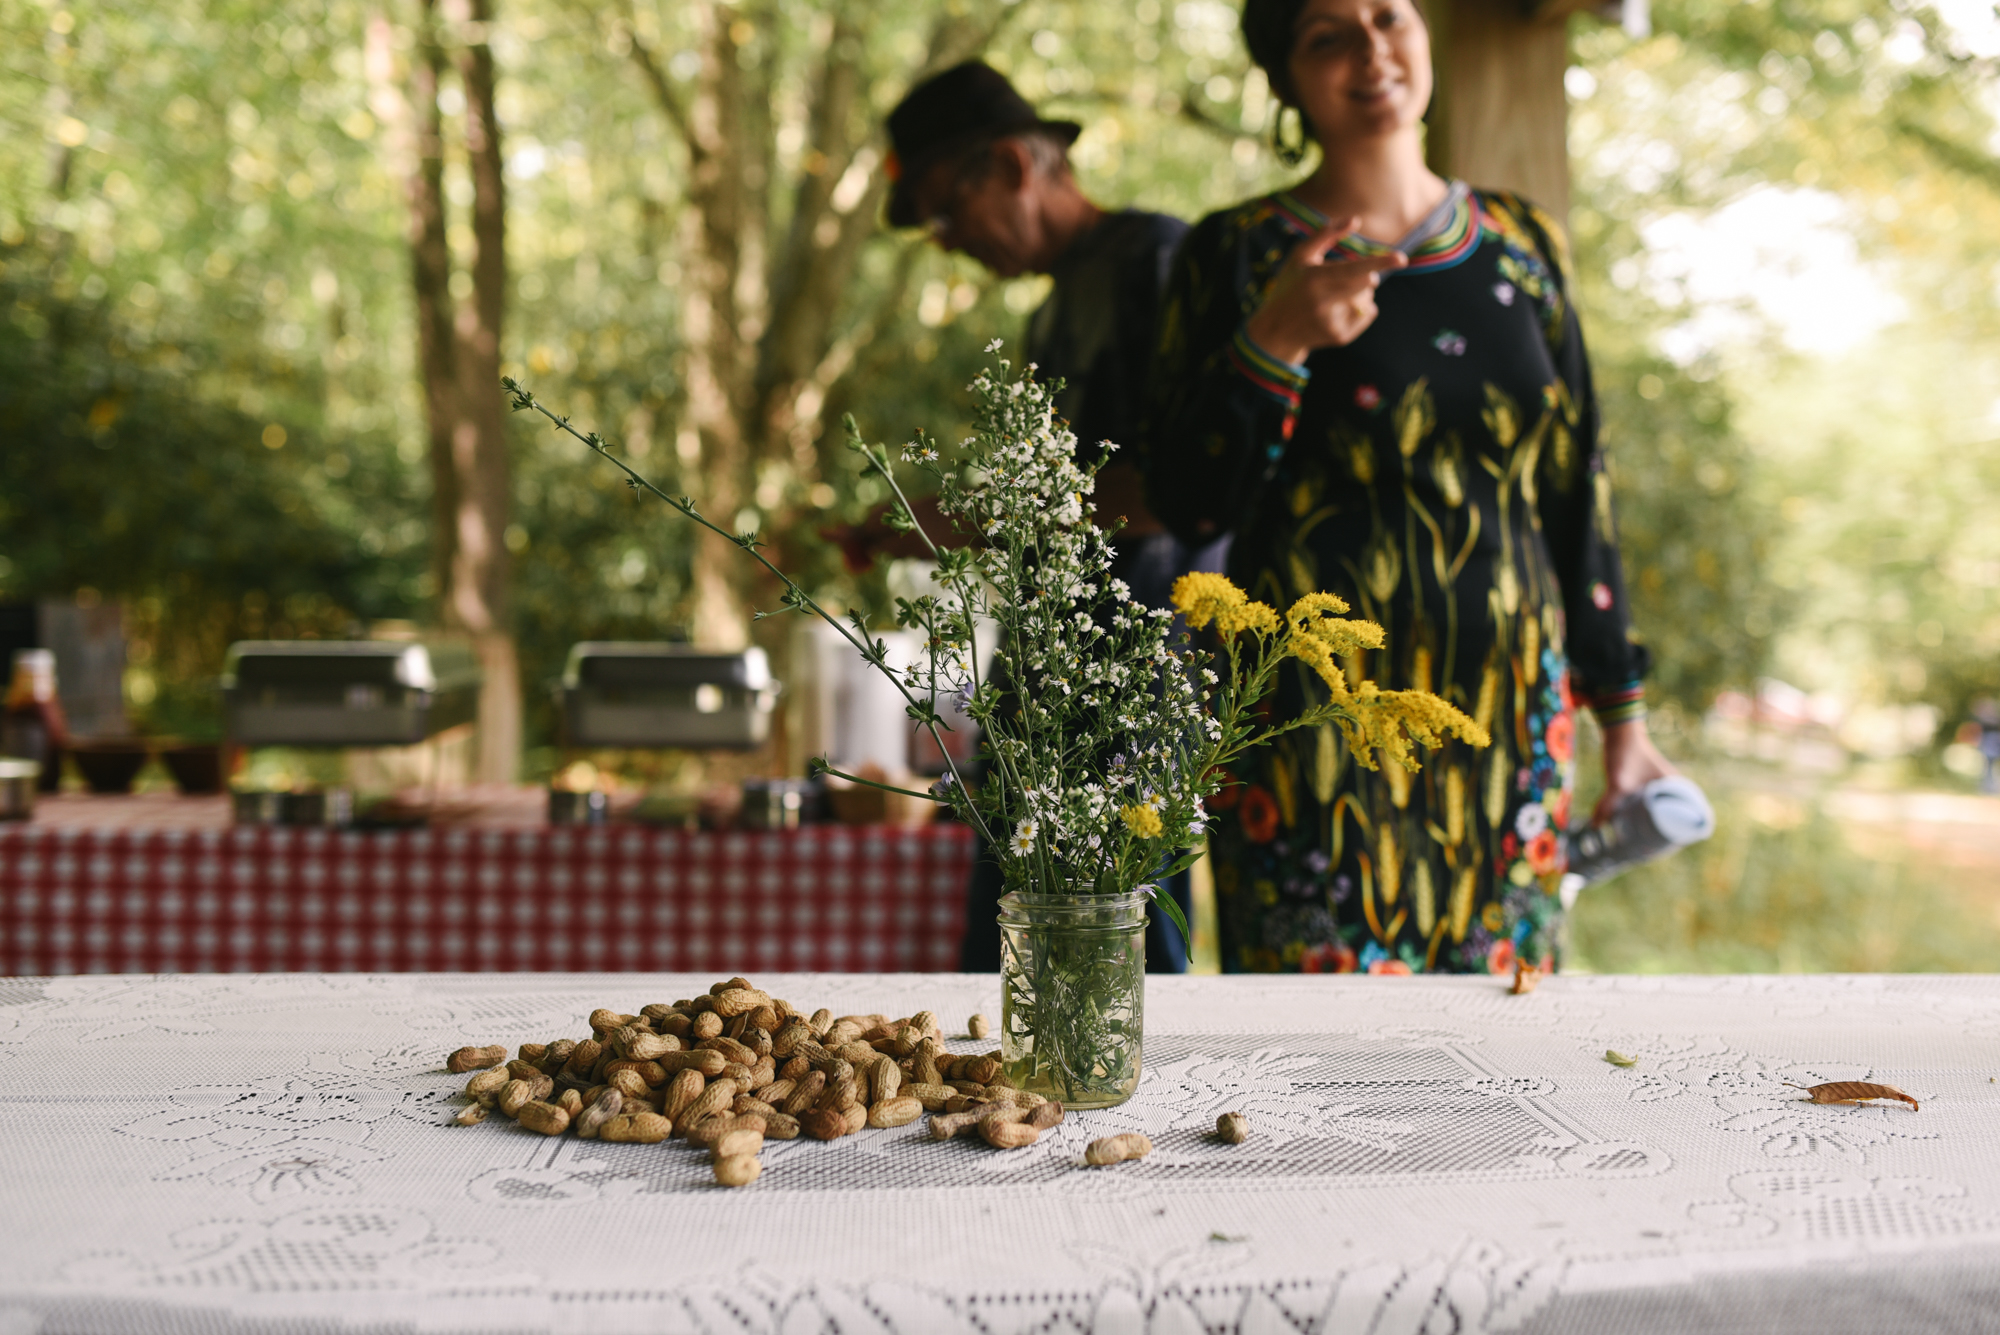  Mountain Wedding, Outdoors, Rustic, West Virginia, Maryland Wedding Photographer, DIY, Casual, Table setting at reception, Wildflowers 